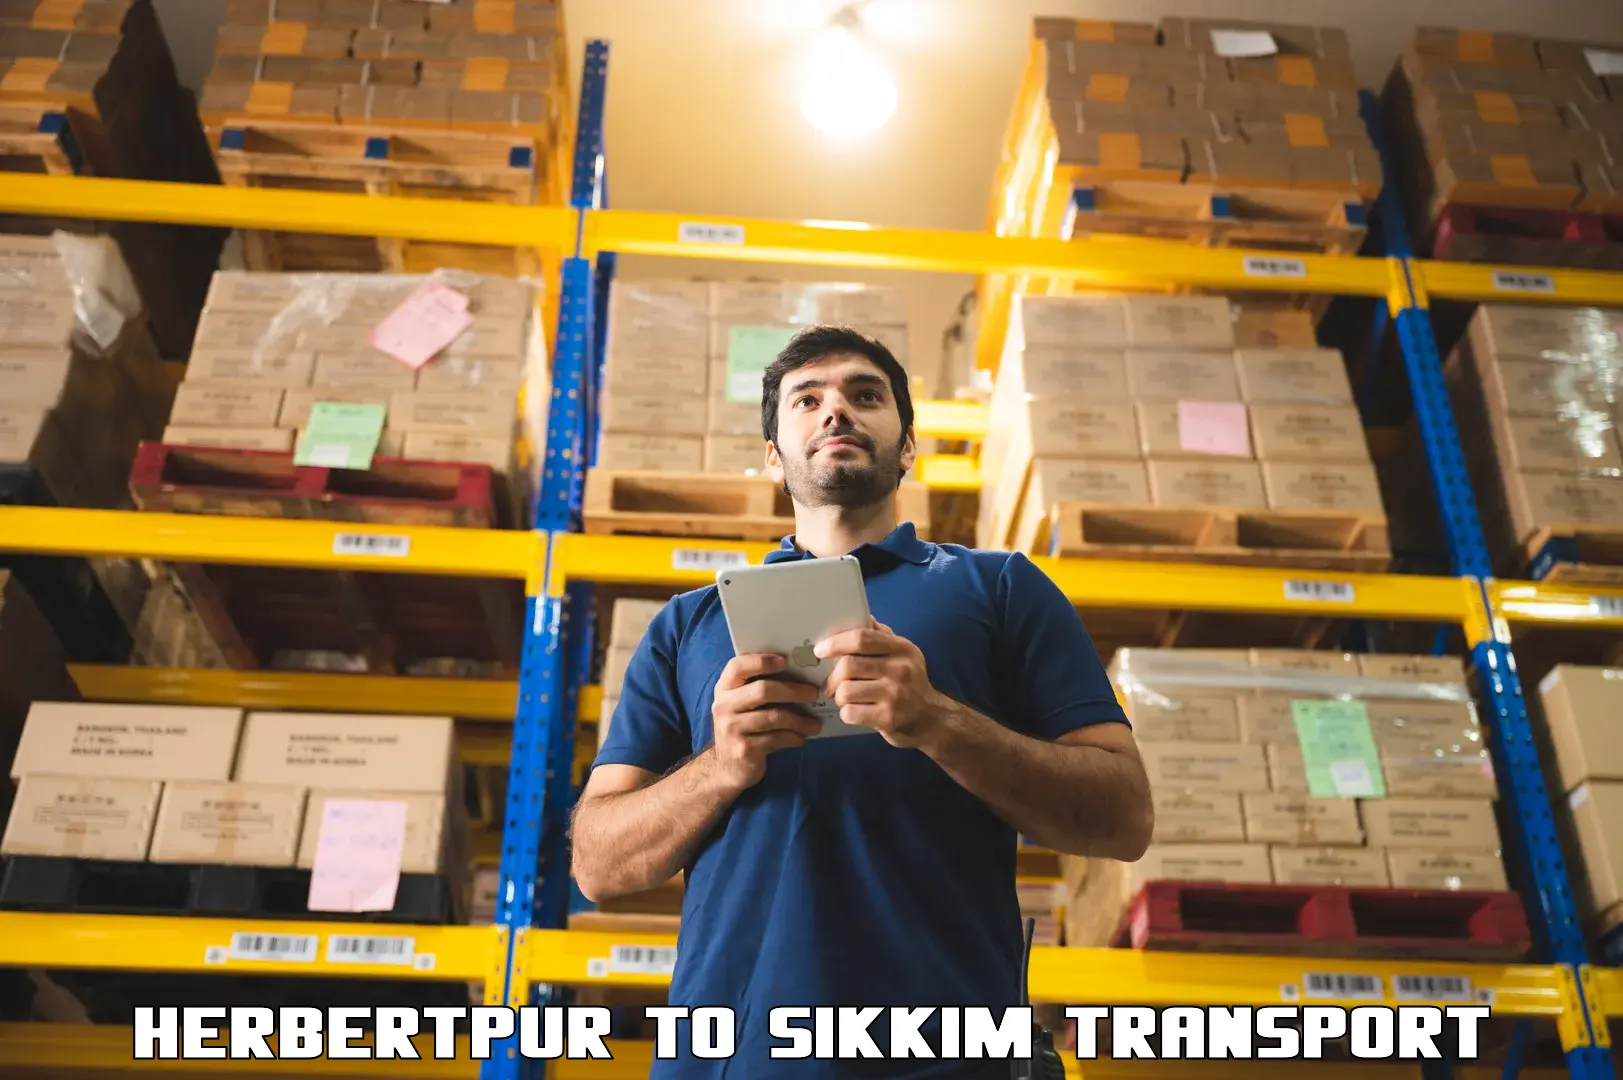 Shipping partner Herbertpur to West Sikkim